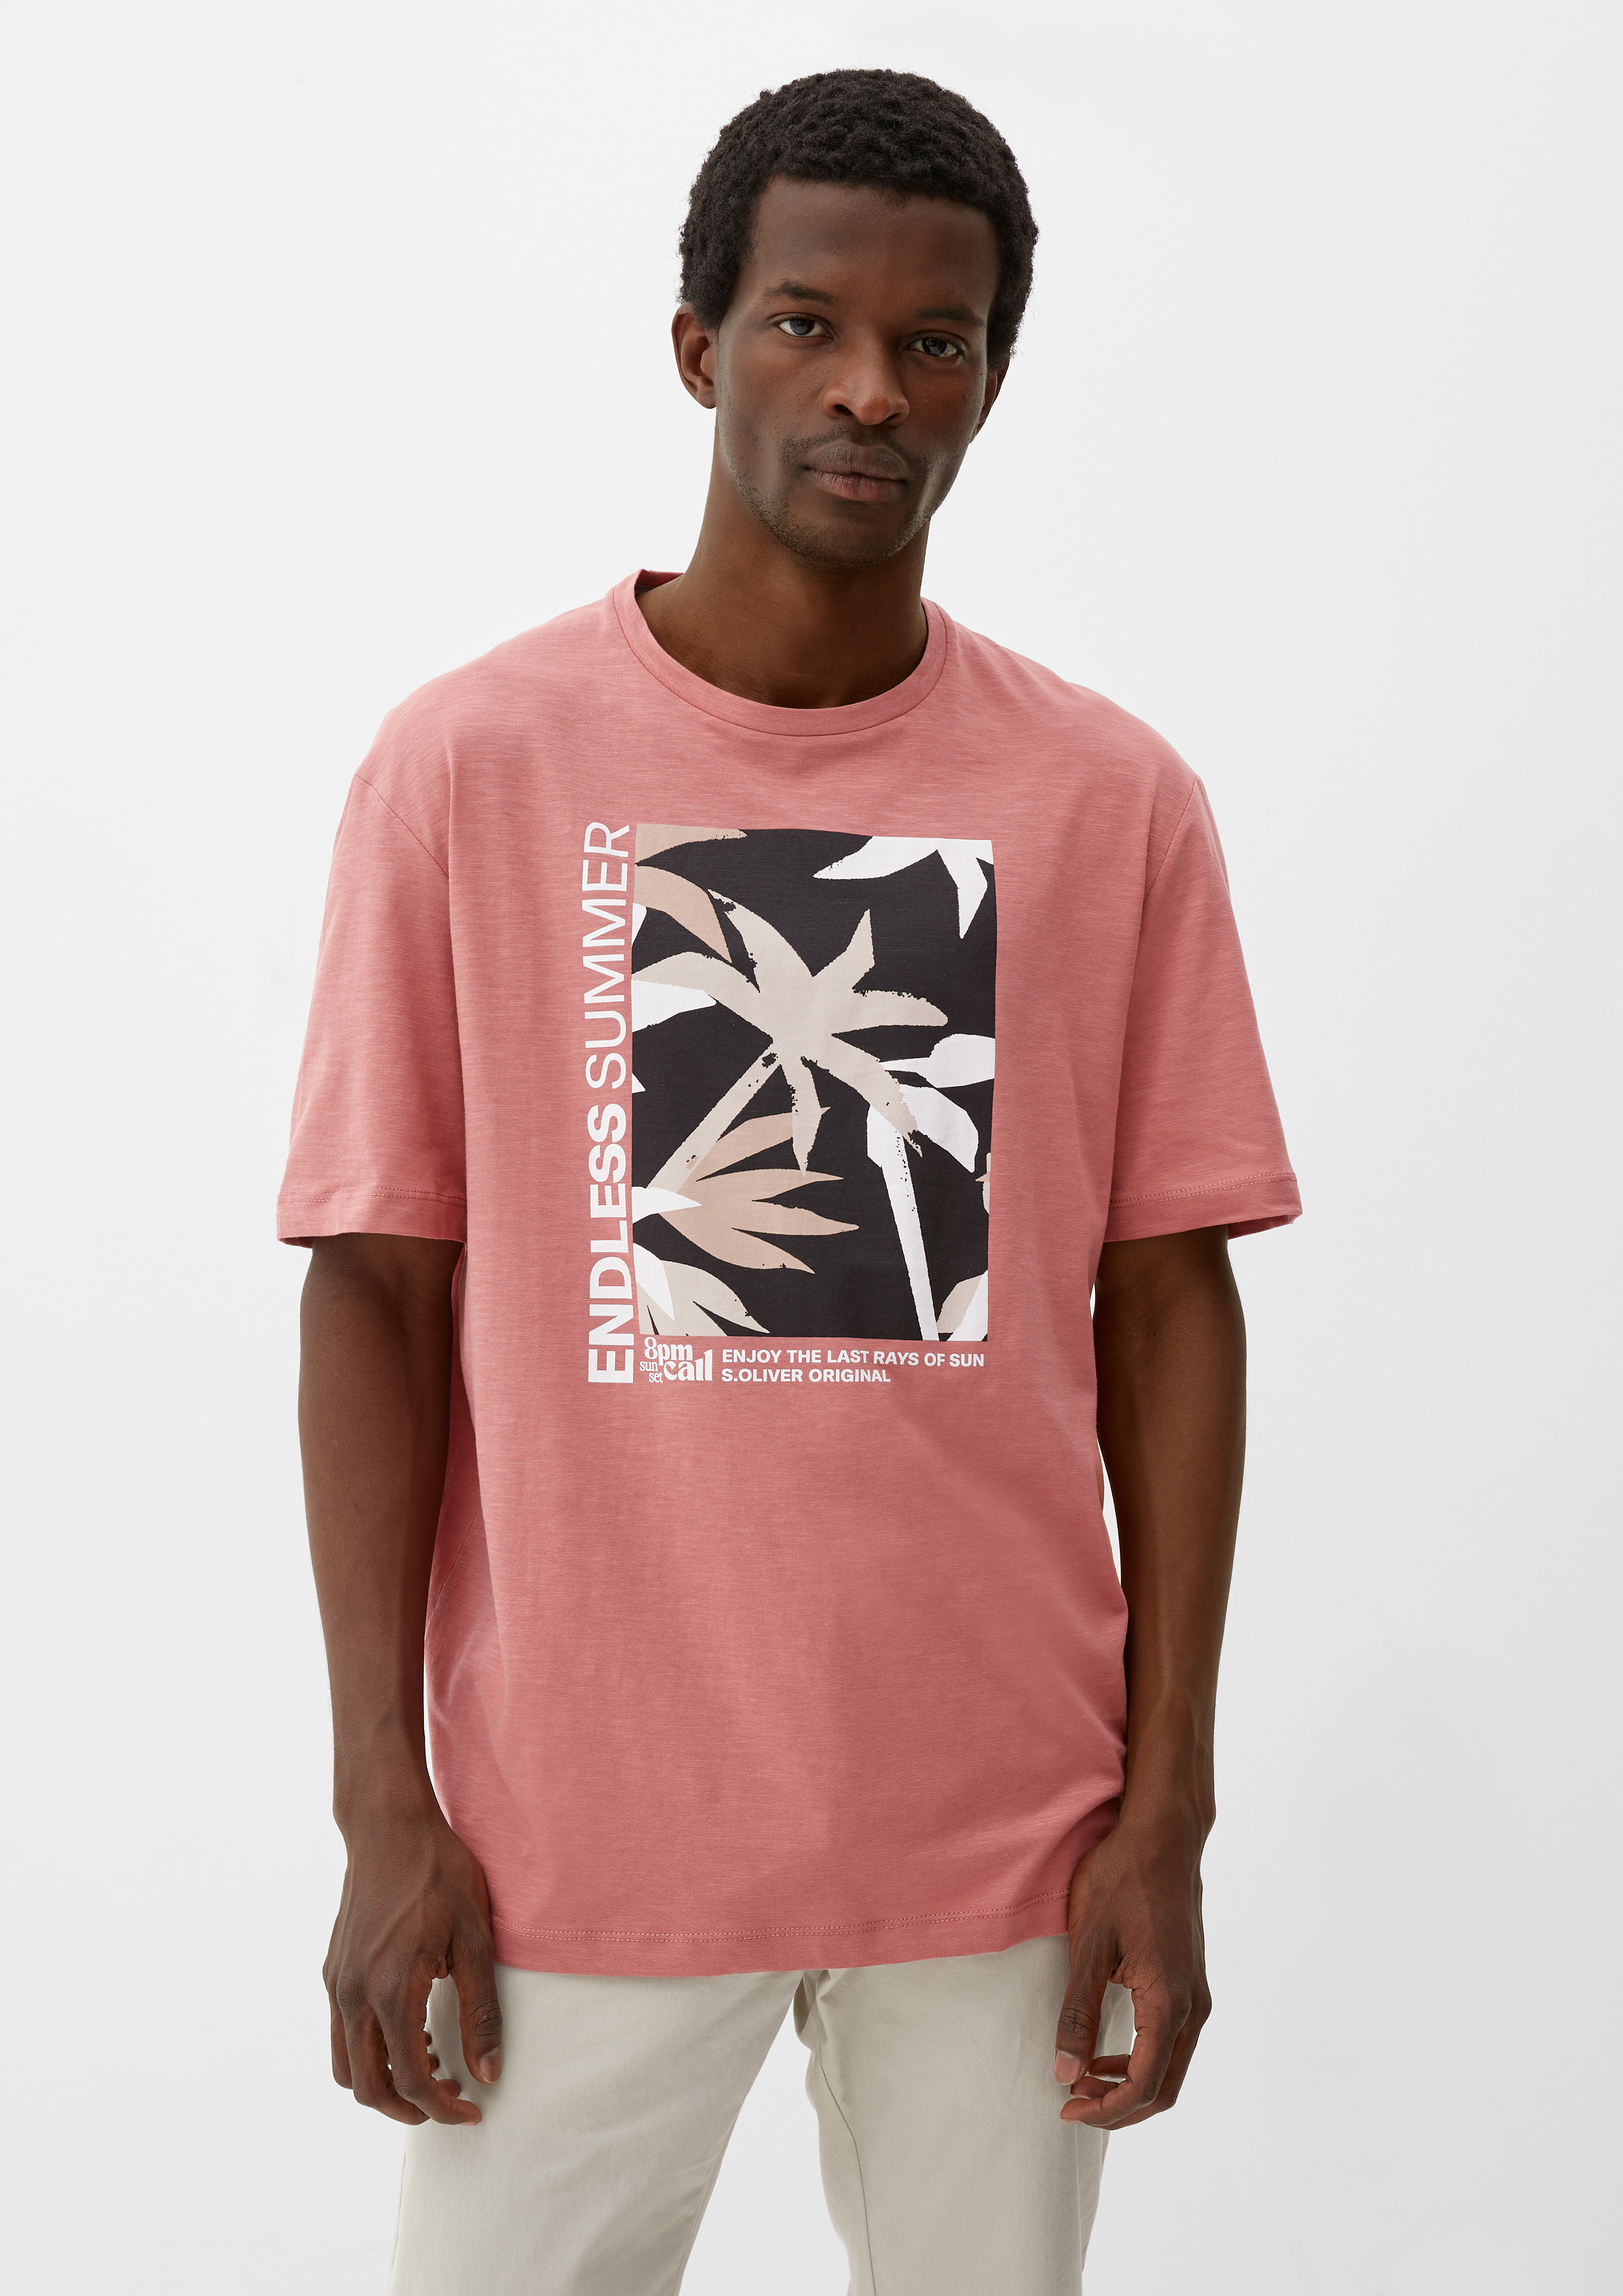 print front - a T-shirt white with